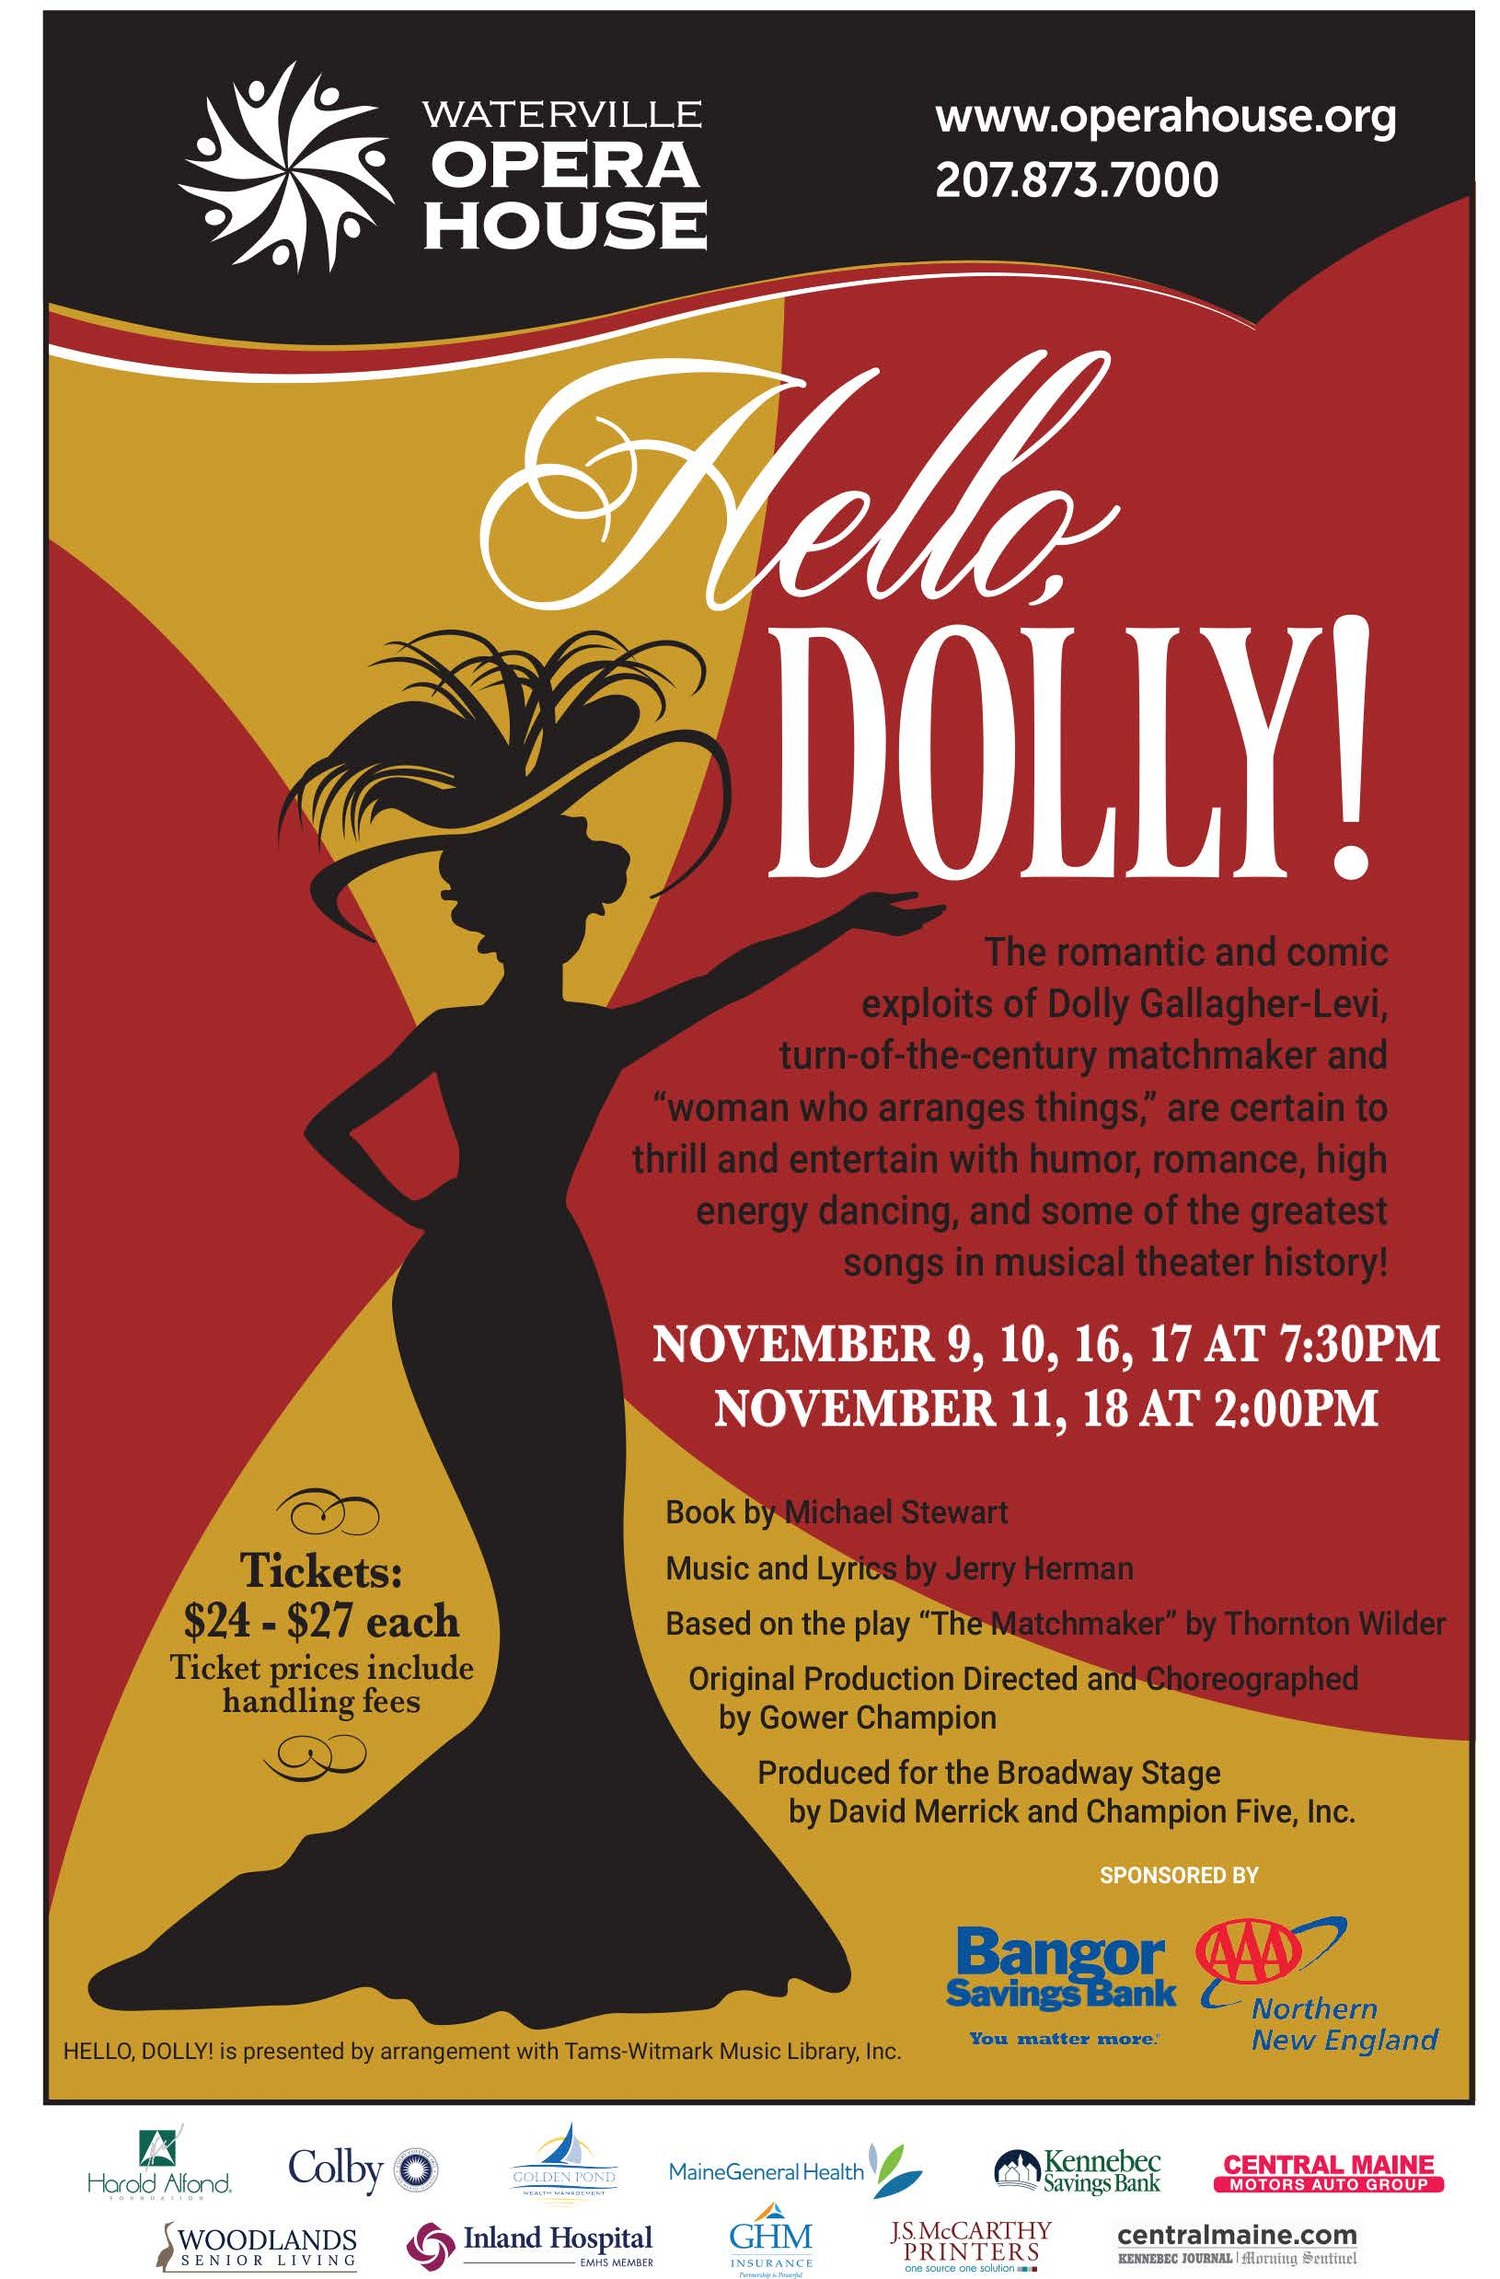 The romantic and comic exploits of Dolly Gallagher-Levi, turn-of-the-century matchmaker and “woman who arranges things,” are certain to thrill and entertain with humor, romance, high energy dancing, and some of the greatest songs in musical theater history! 1